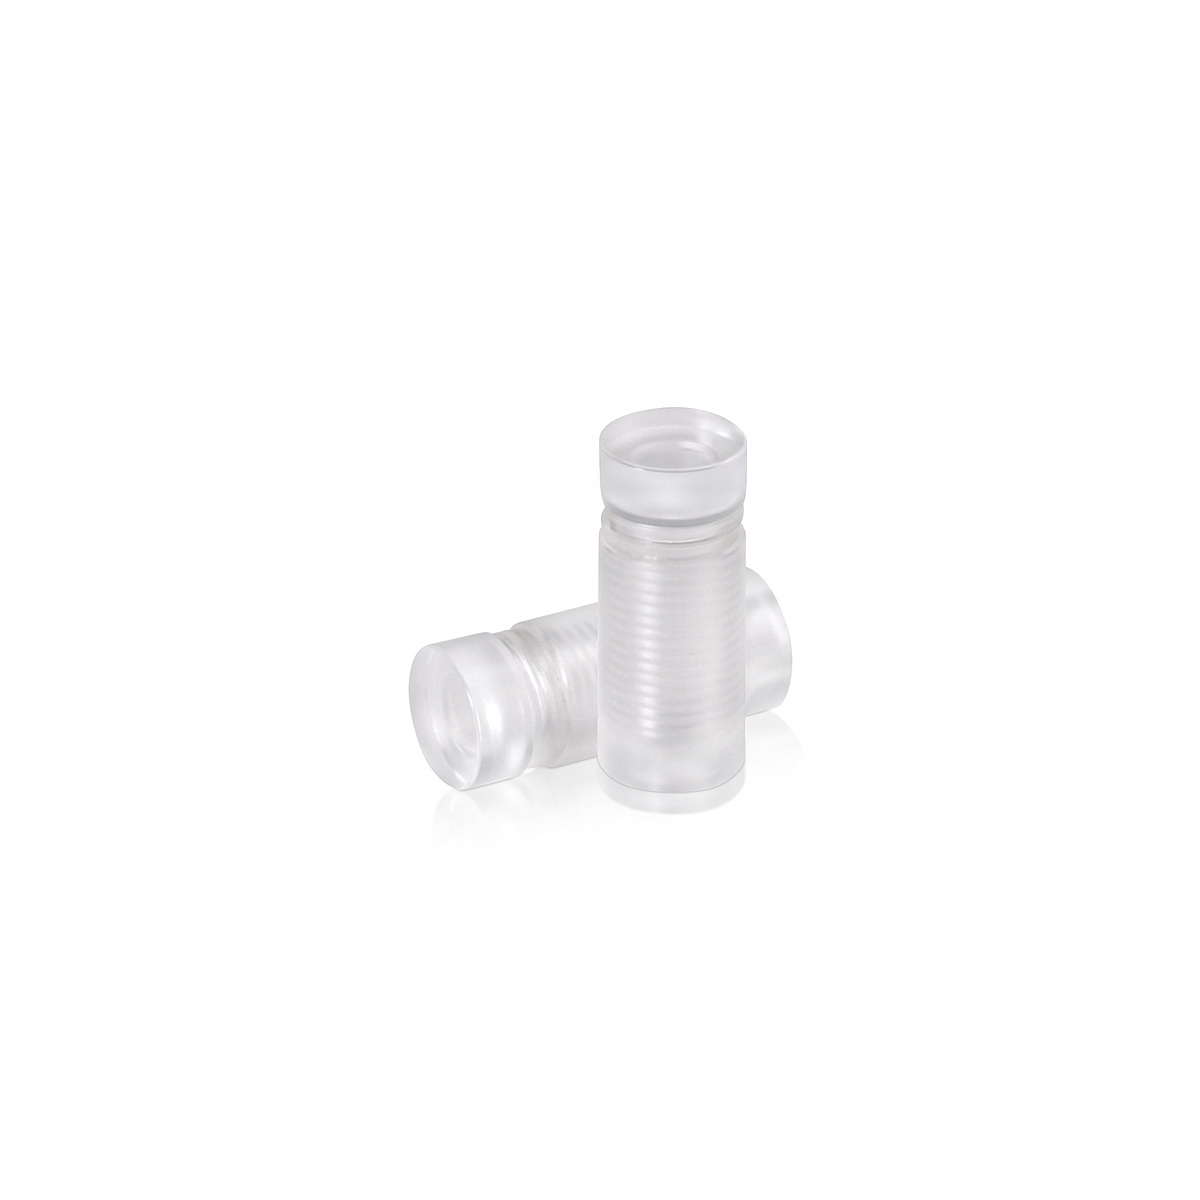 1/2'' Diameter X 1/2'' Barrel Length, Clear Acrylic Standoffs. Easy Fasten Standoff (For Inside Use Only) Tamper Proof [Required Material Hole Size: 3/8'']